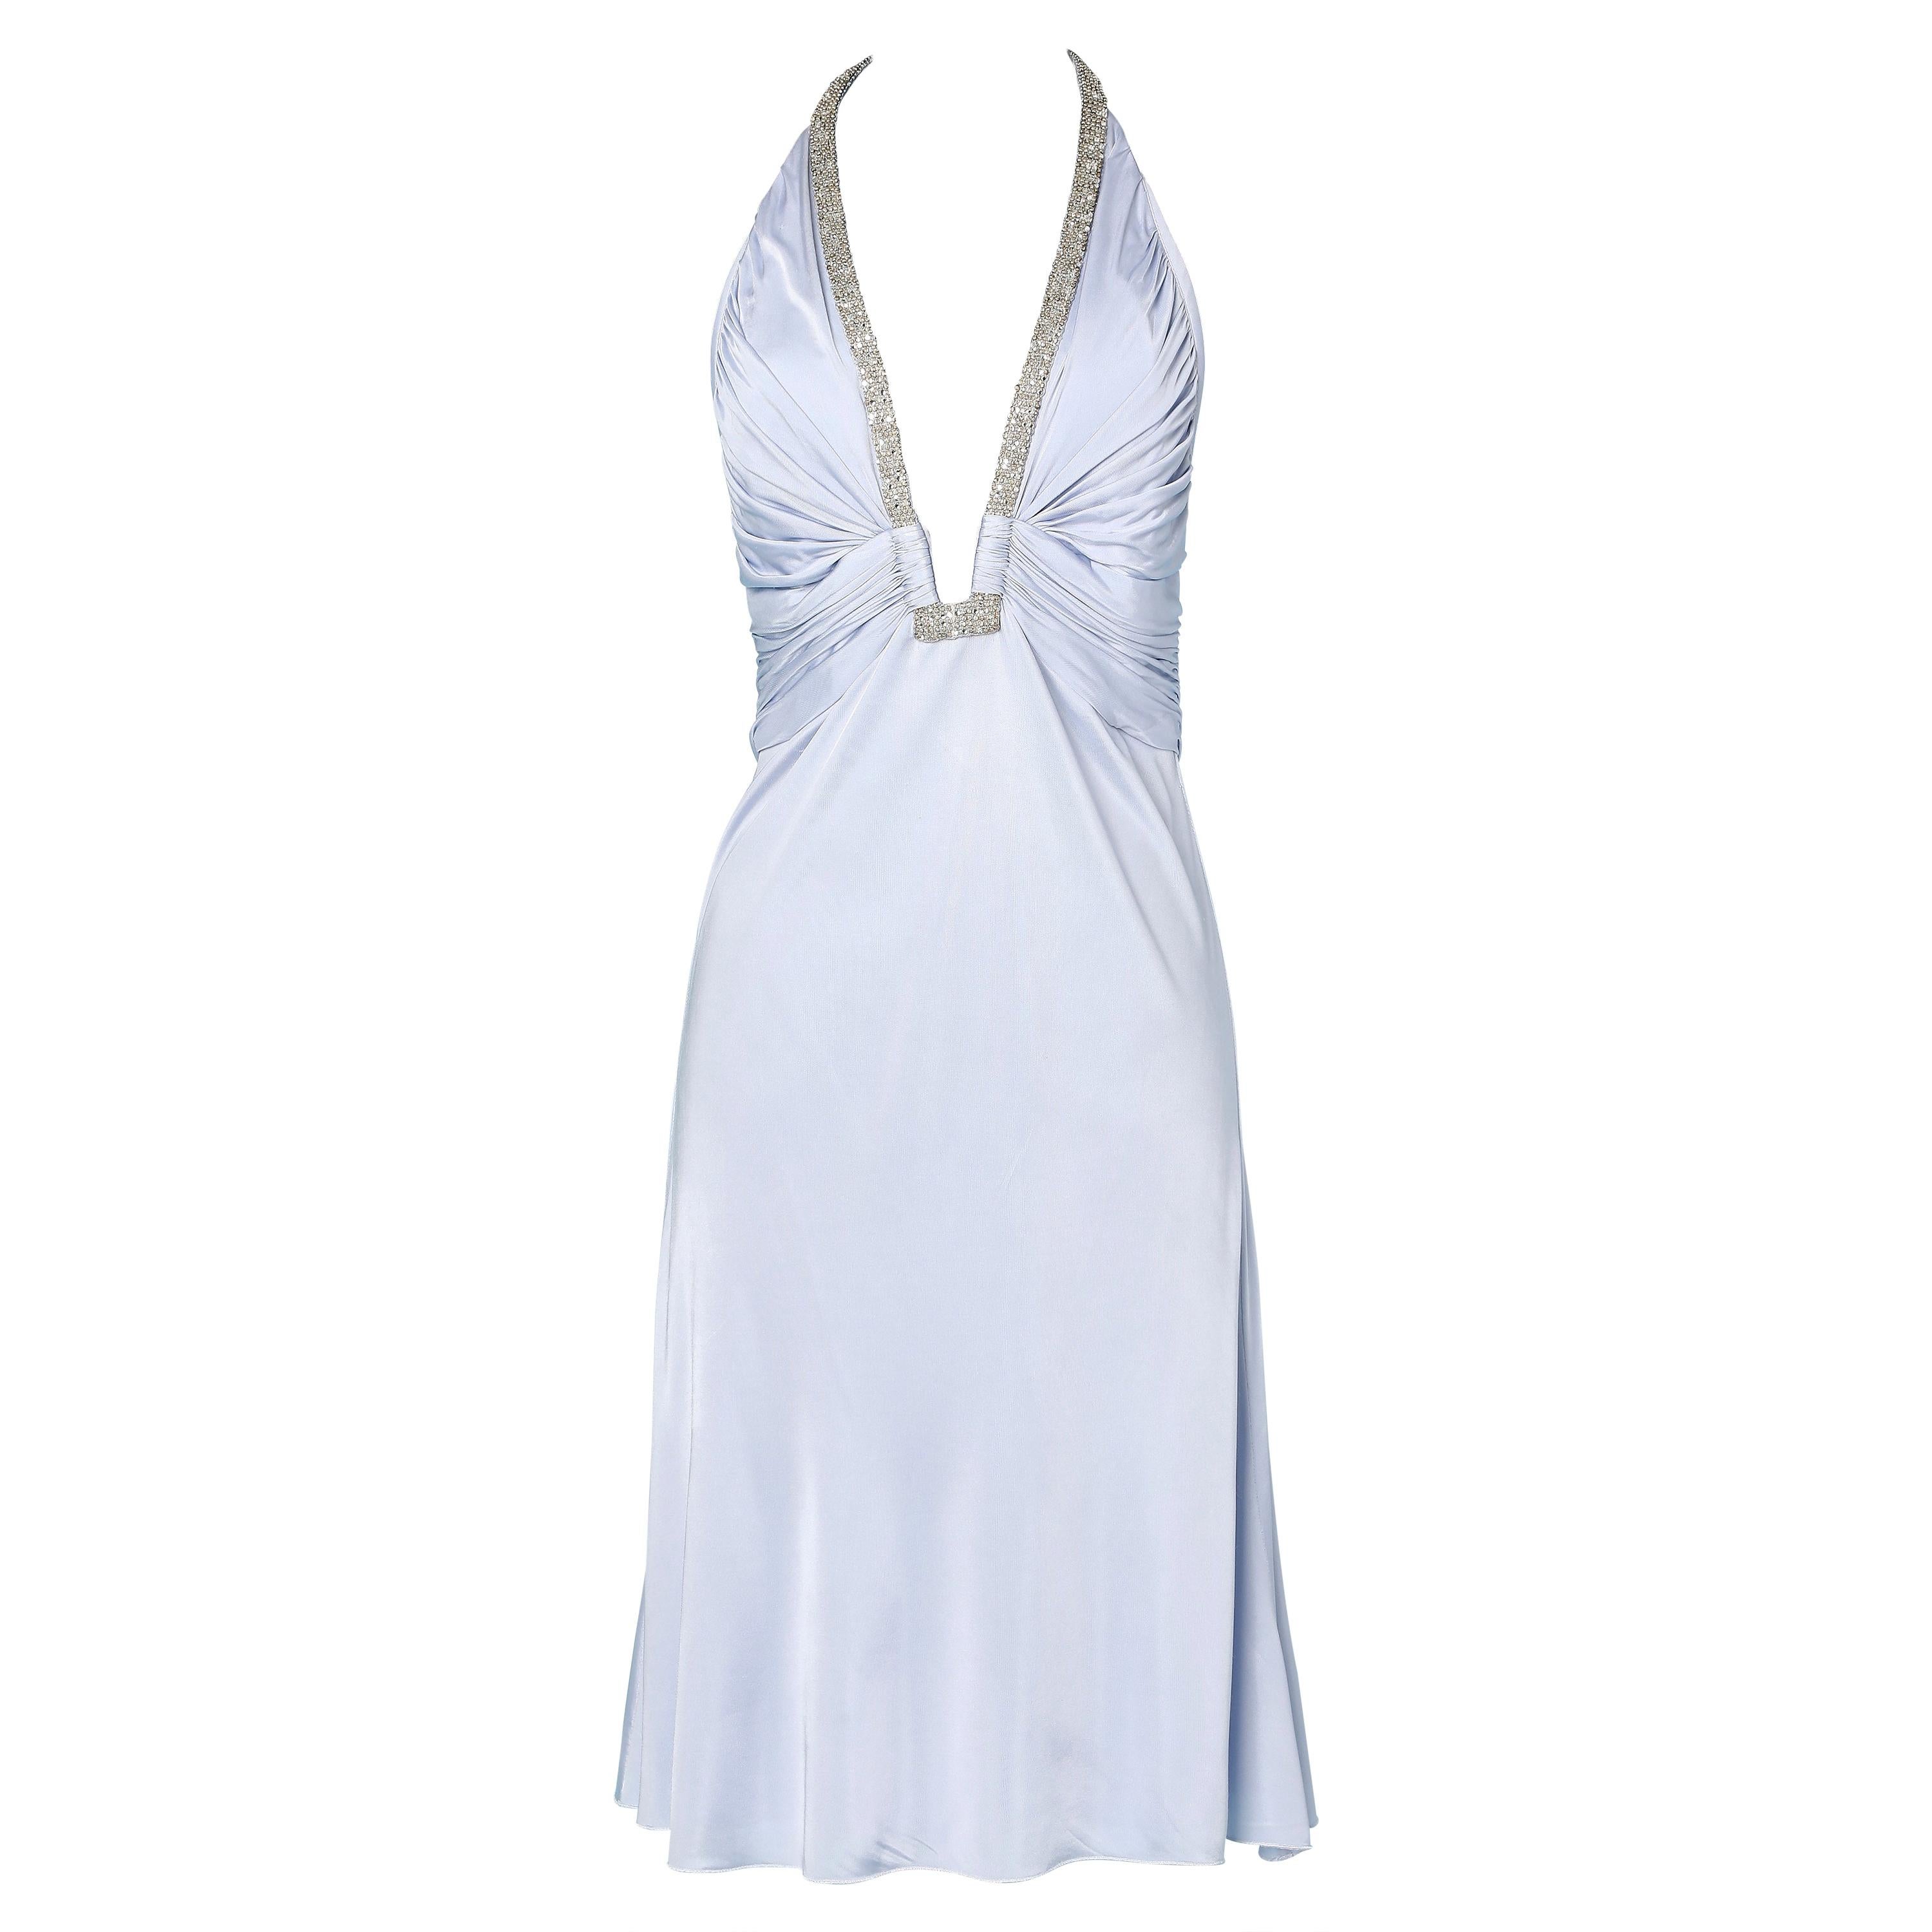 Pale blue jersey dress with embroidered ...